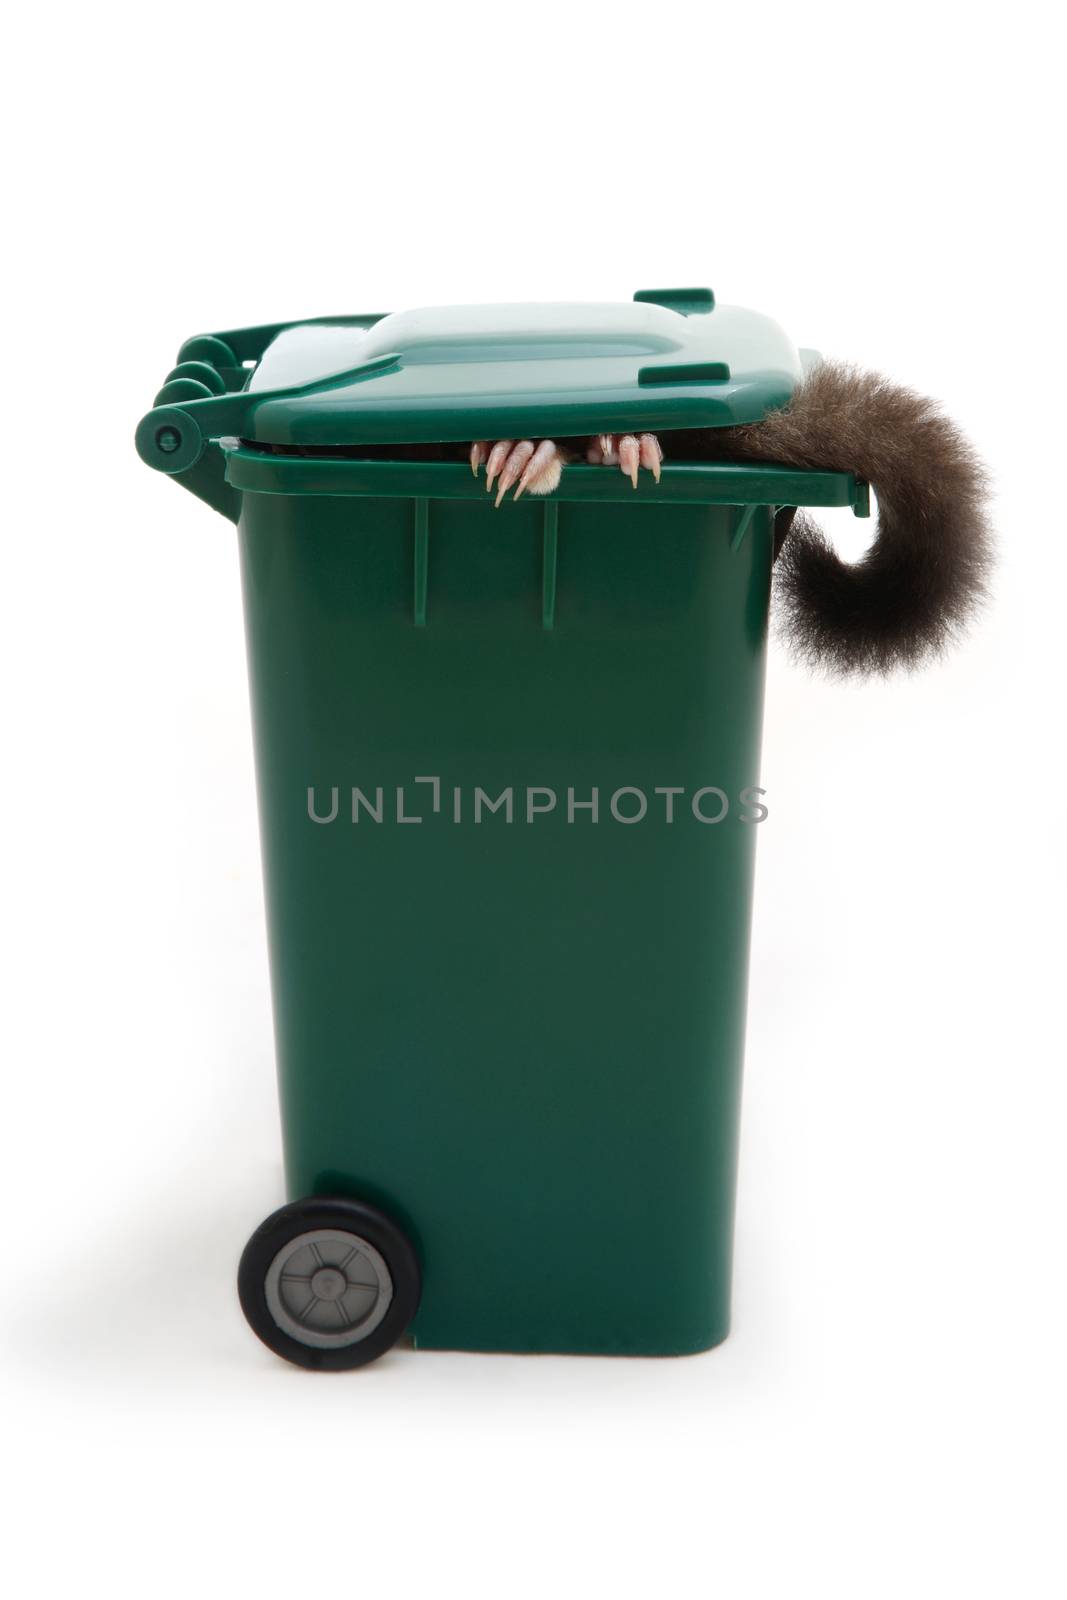 What kind of animal that show it's hands and tail in the garbage bin on white background.